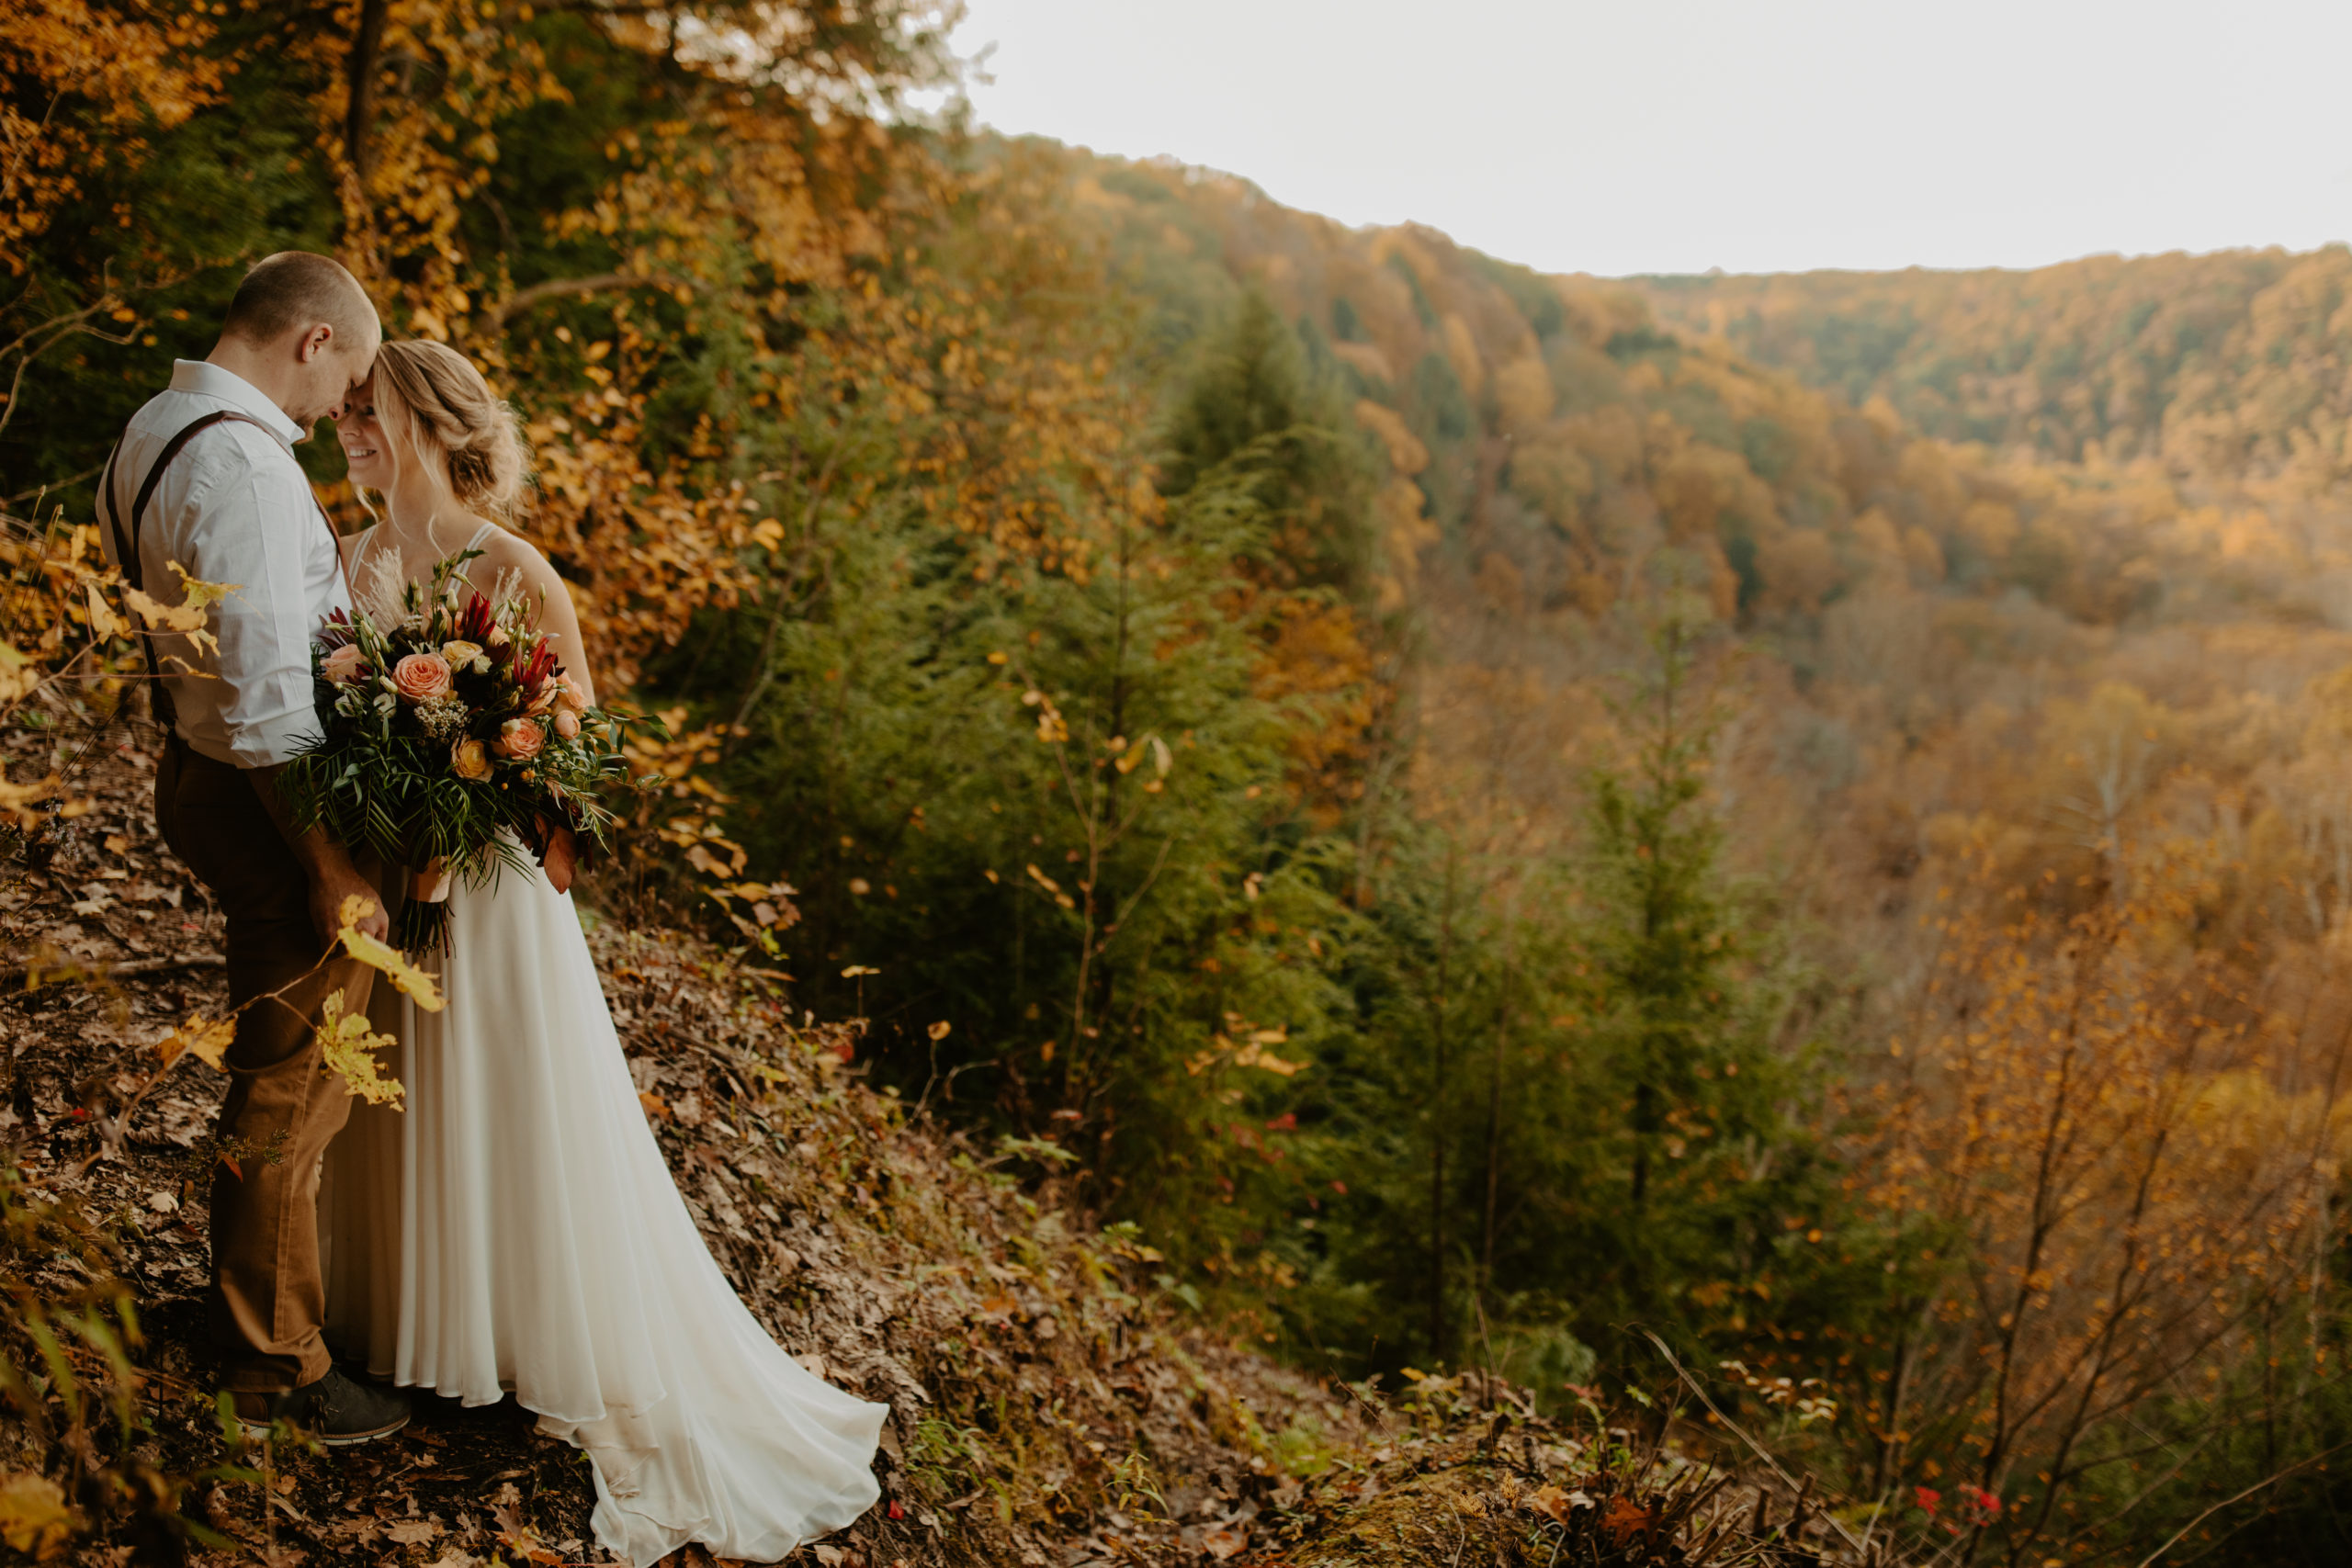 Eloping couple at Mohican State Park Lookout observation